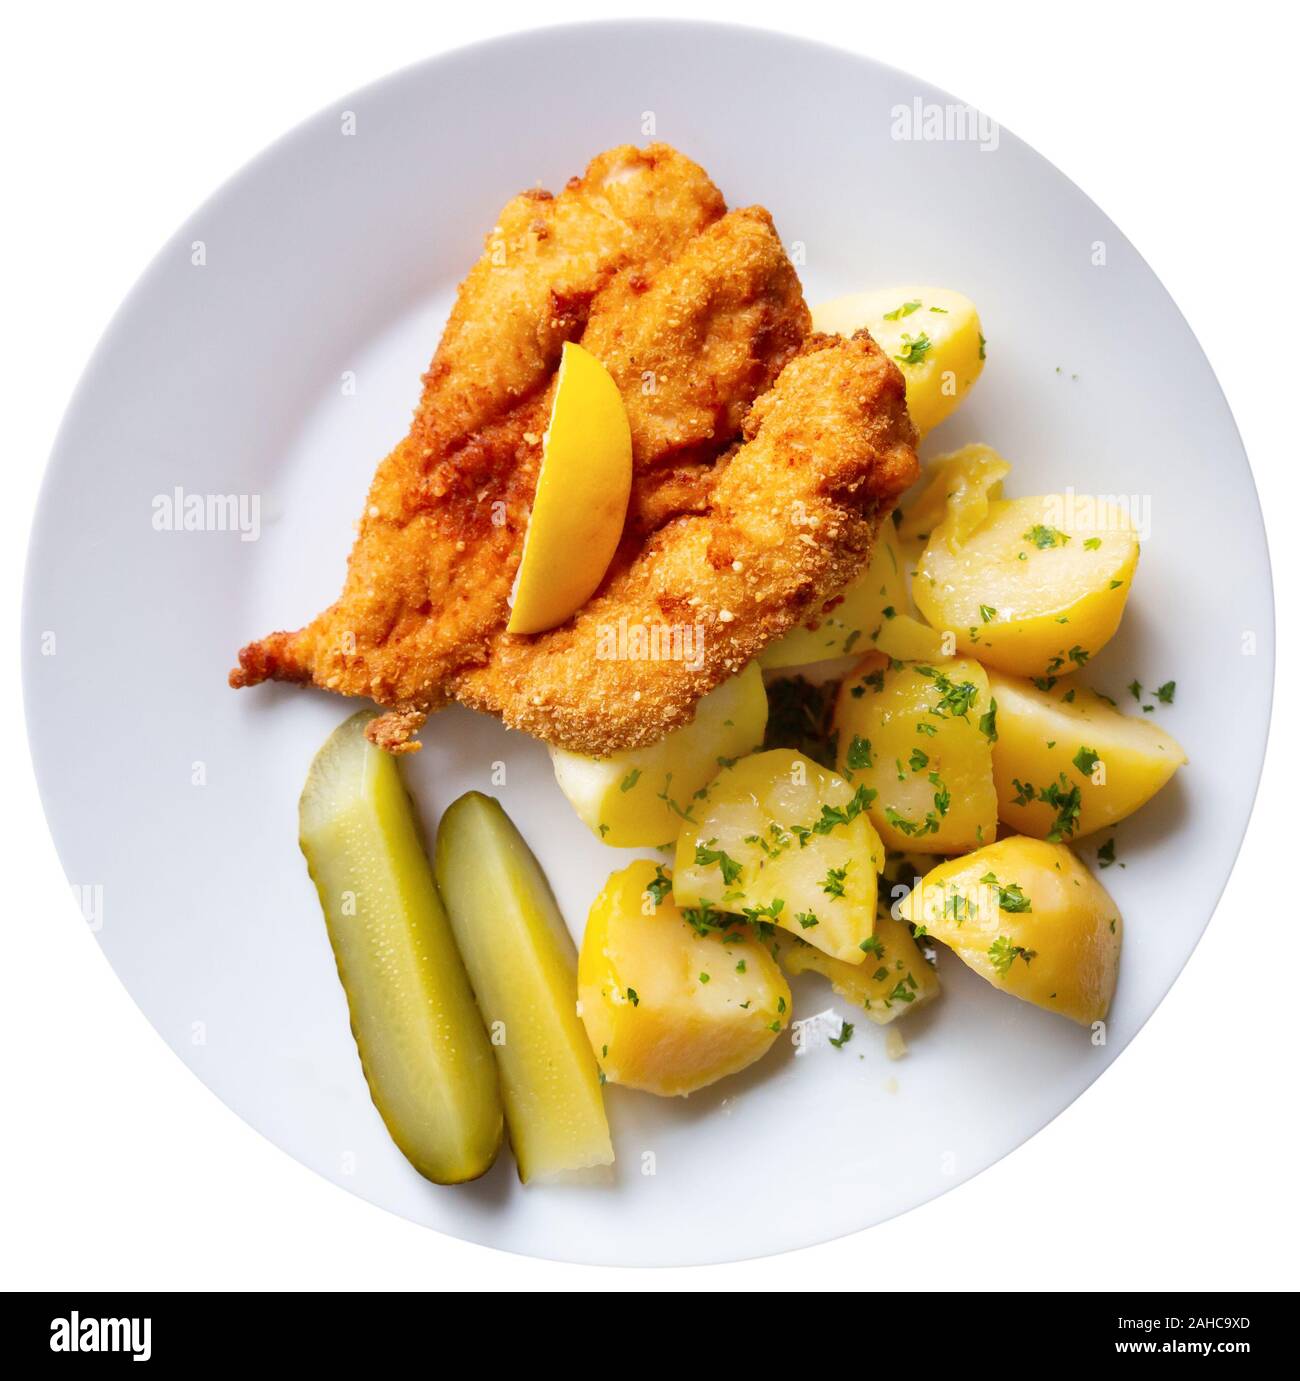 Top view of fried chicken cutlet breaded with Parmesan served with boiled potatoes, greens and pickles. Traditional Czech dish. Isolated over white ba Stock Photo